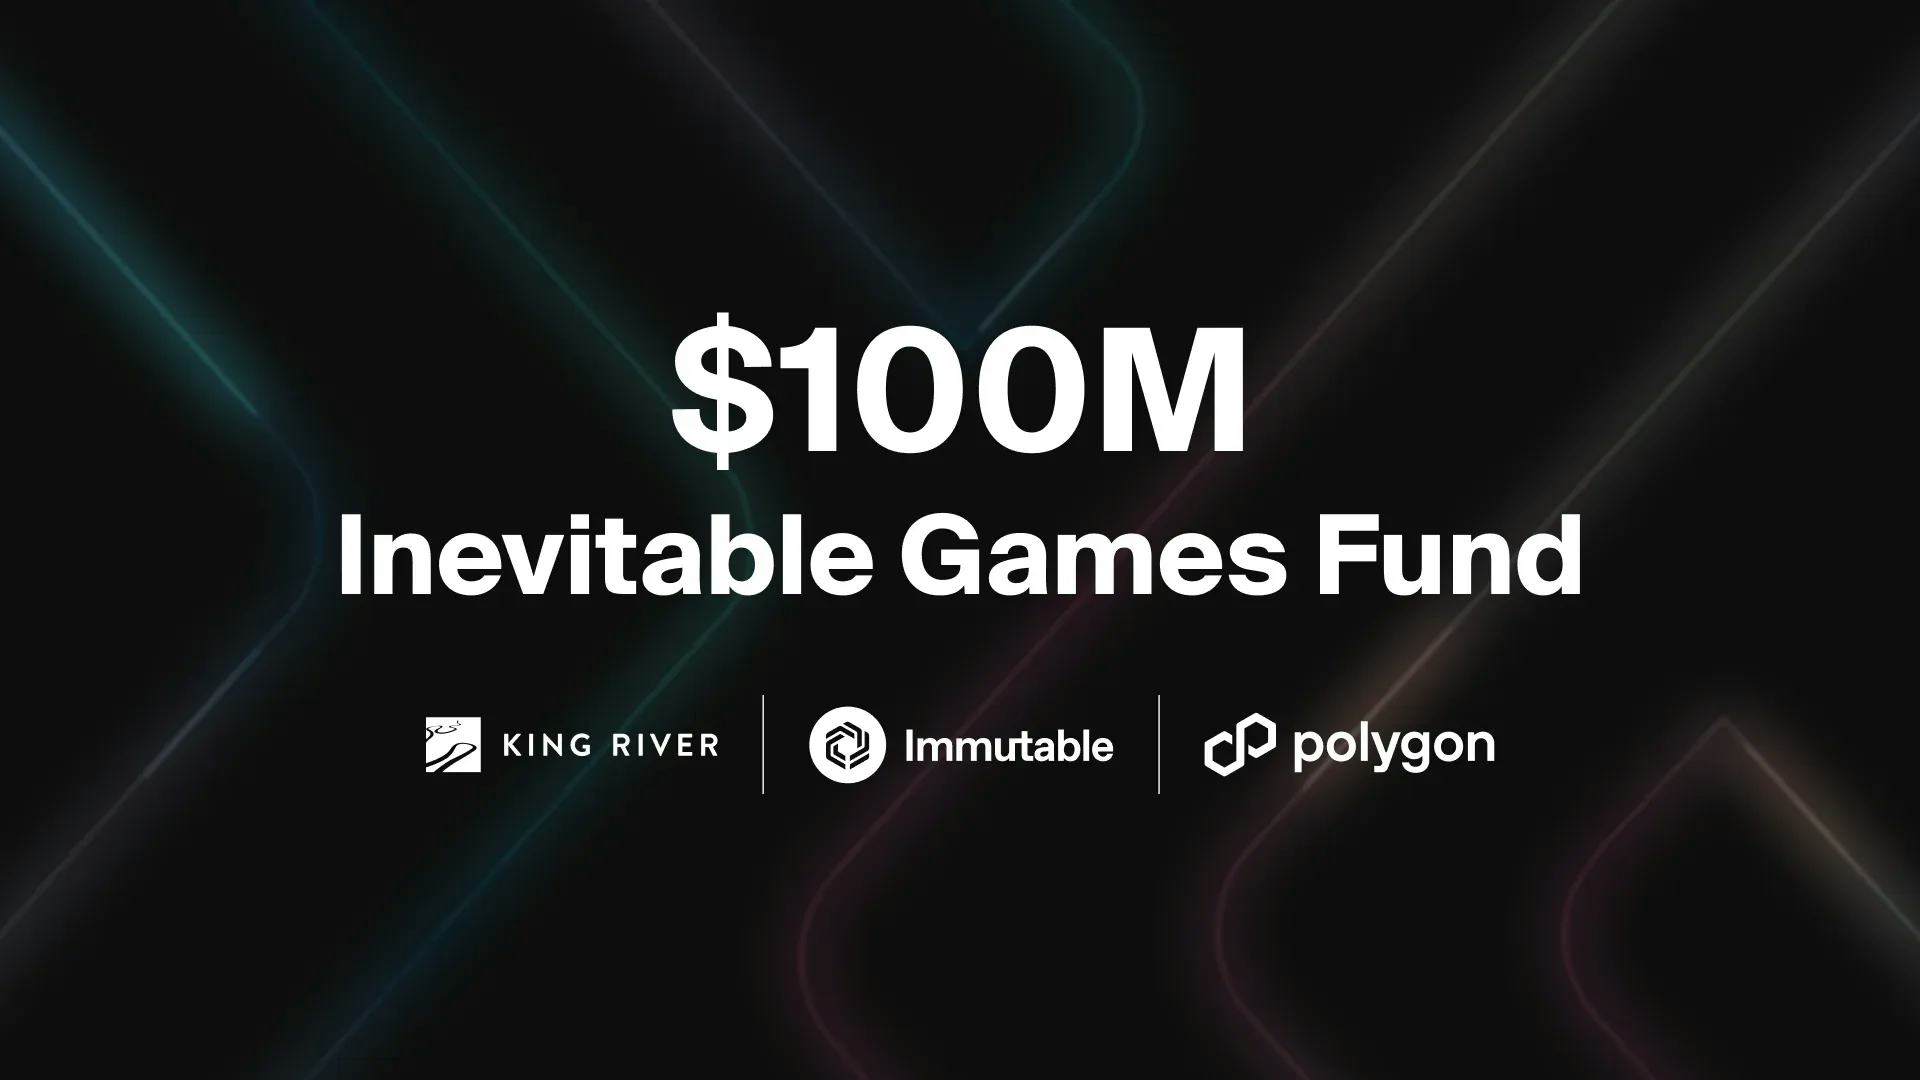 New $100M Inevitable Games Fund for Web3 Gaming Startups